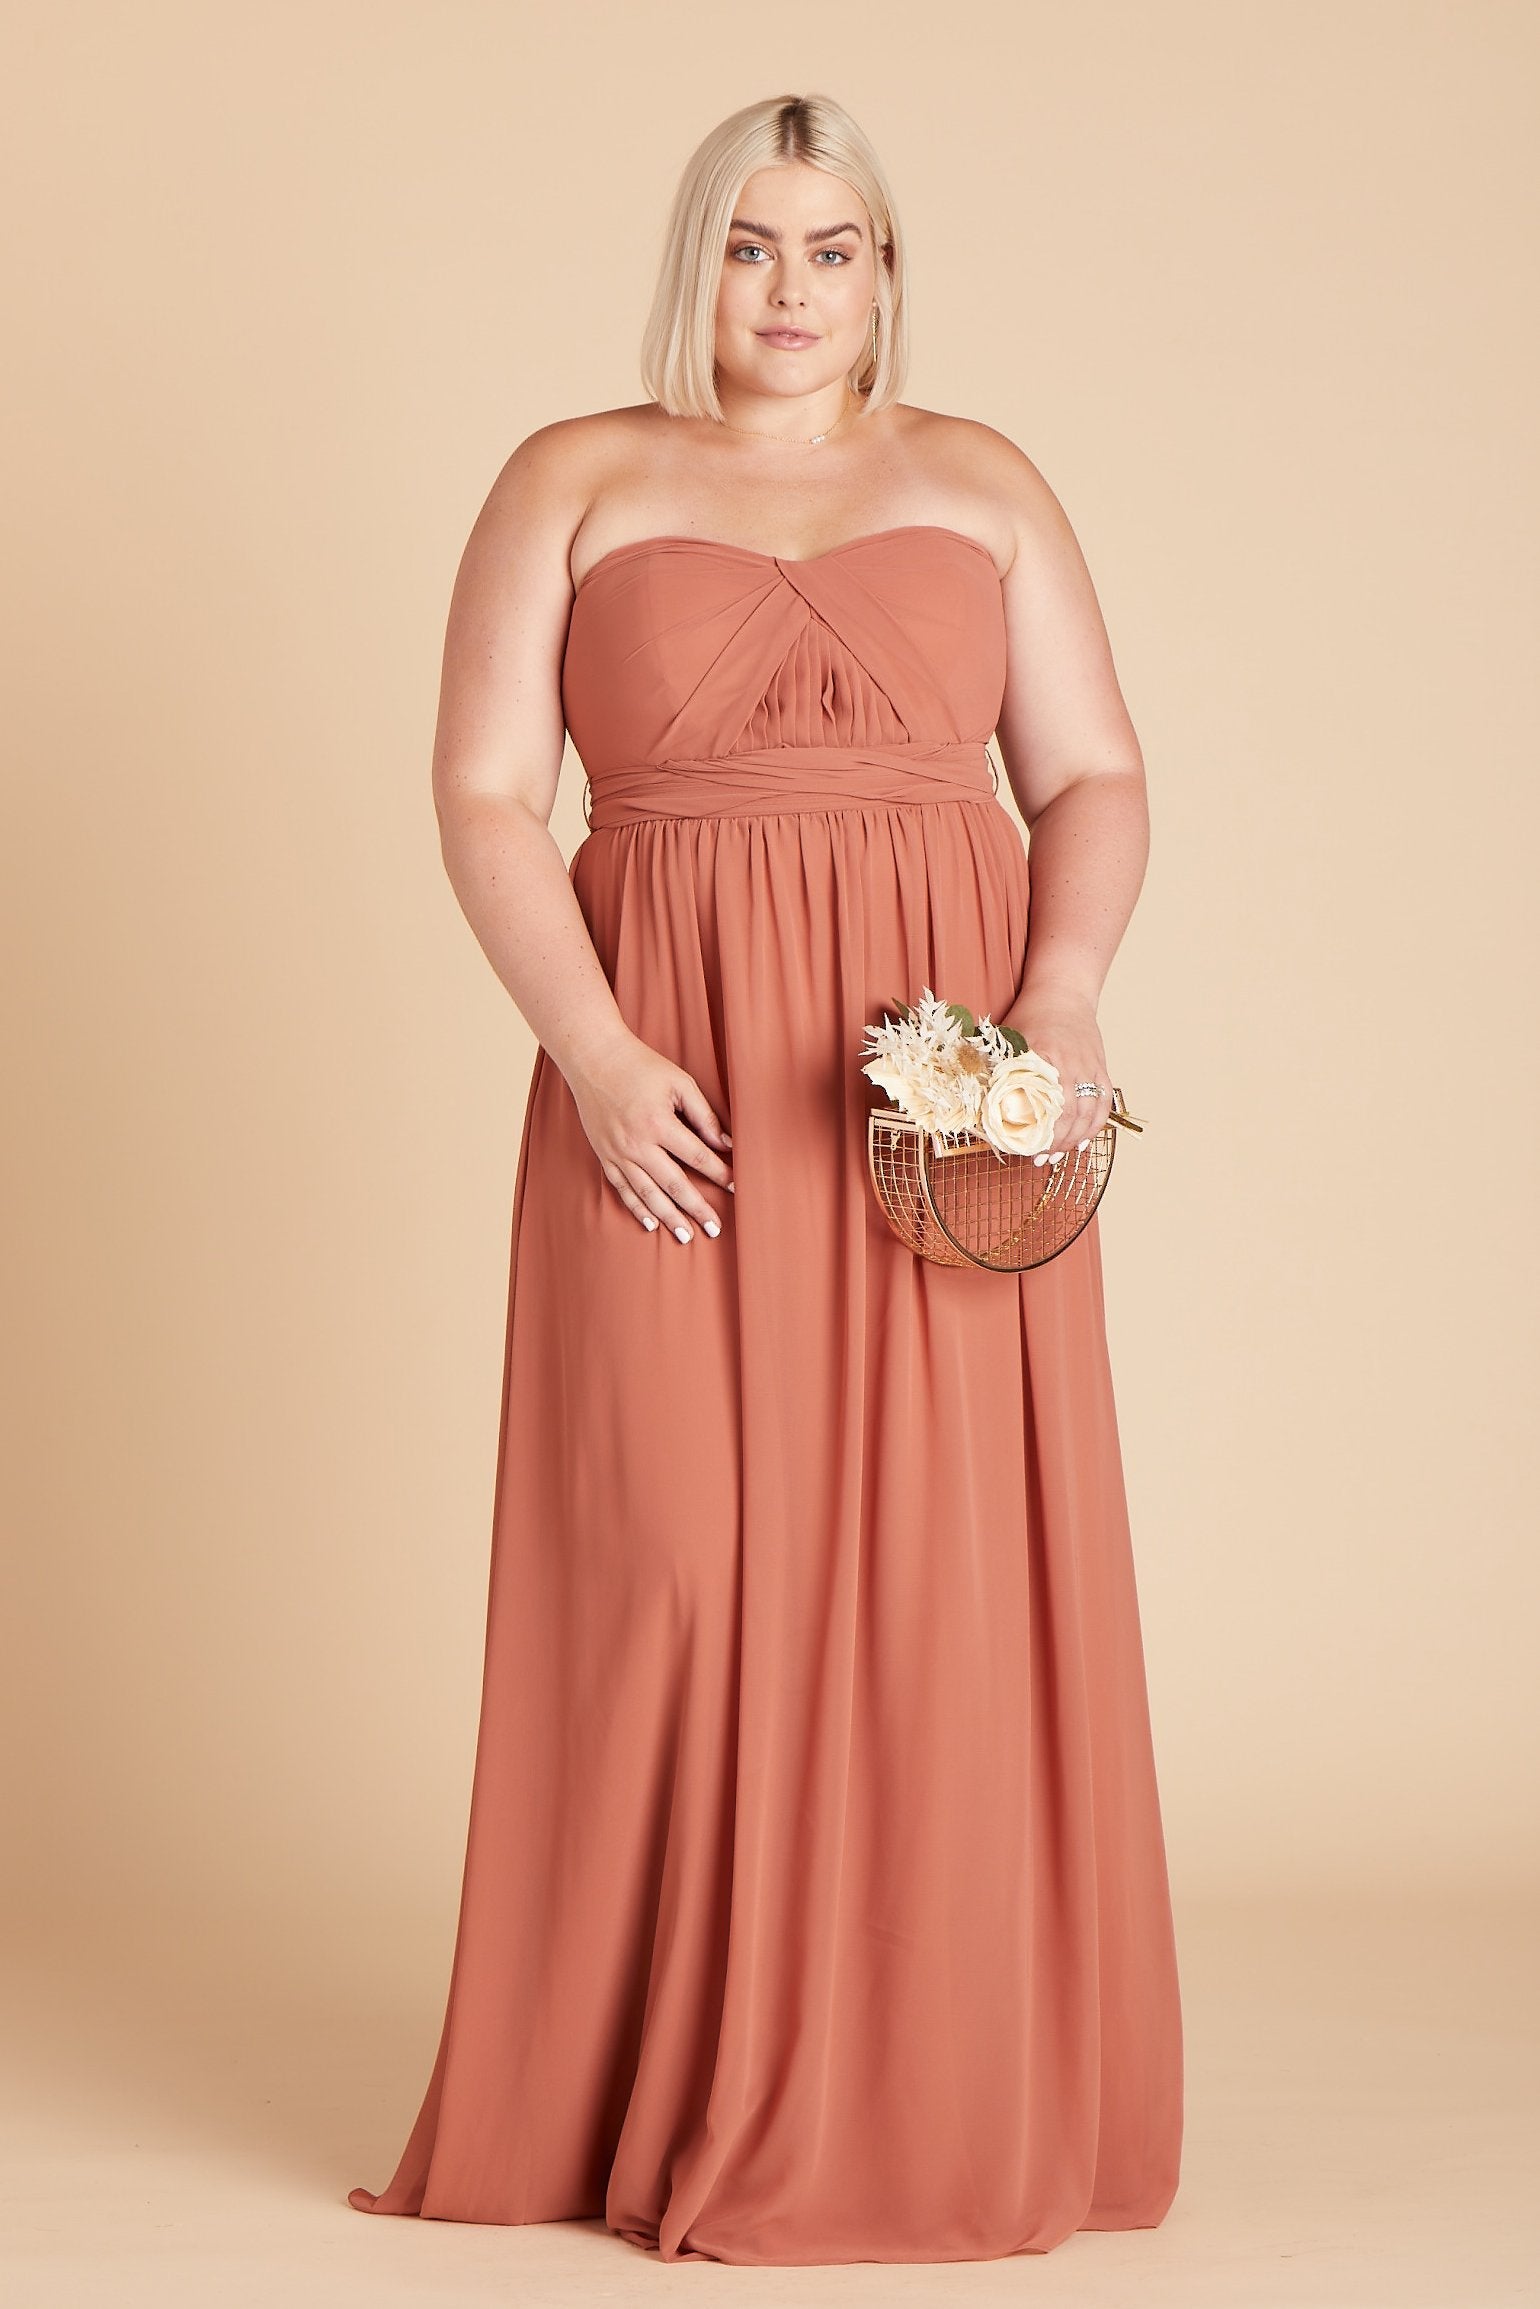 Grace convertible plus size bridesmaid dress in terracotta orange chiffon by Birdy Grey, front view